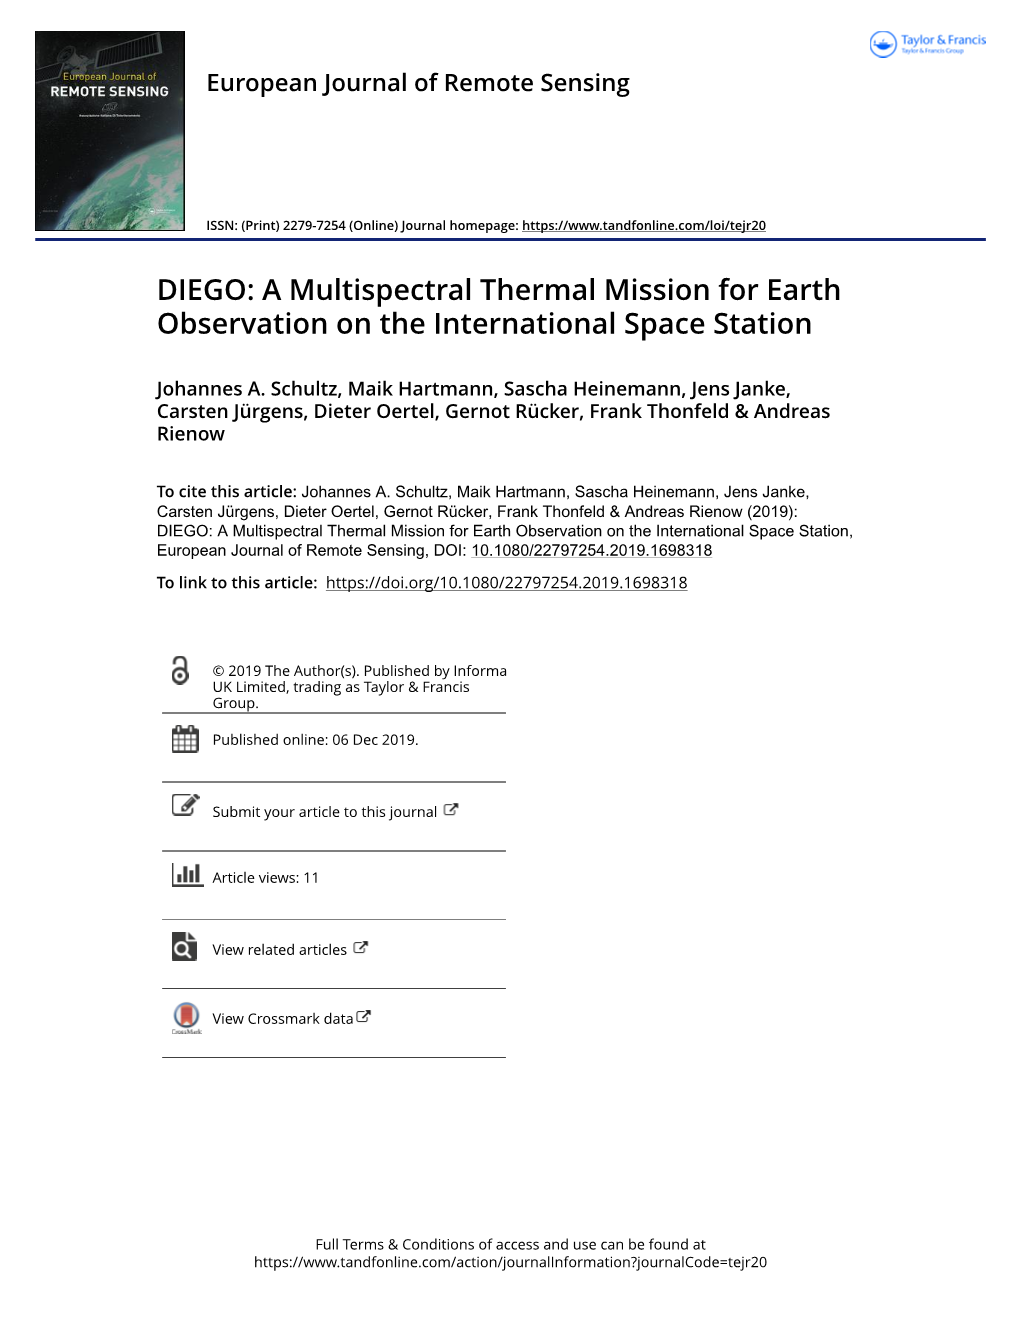 DIEGO: a Multispectral Thermal Mission for Earth Observation on the International Space Station